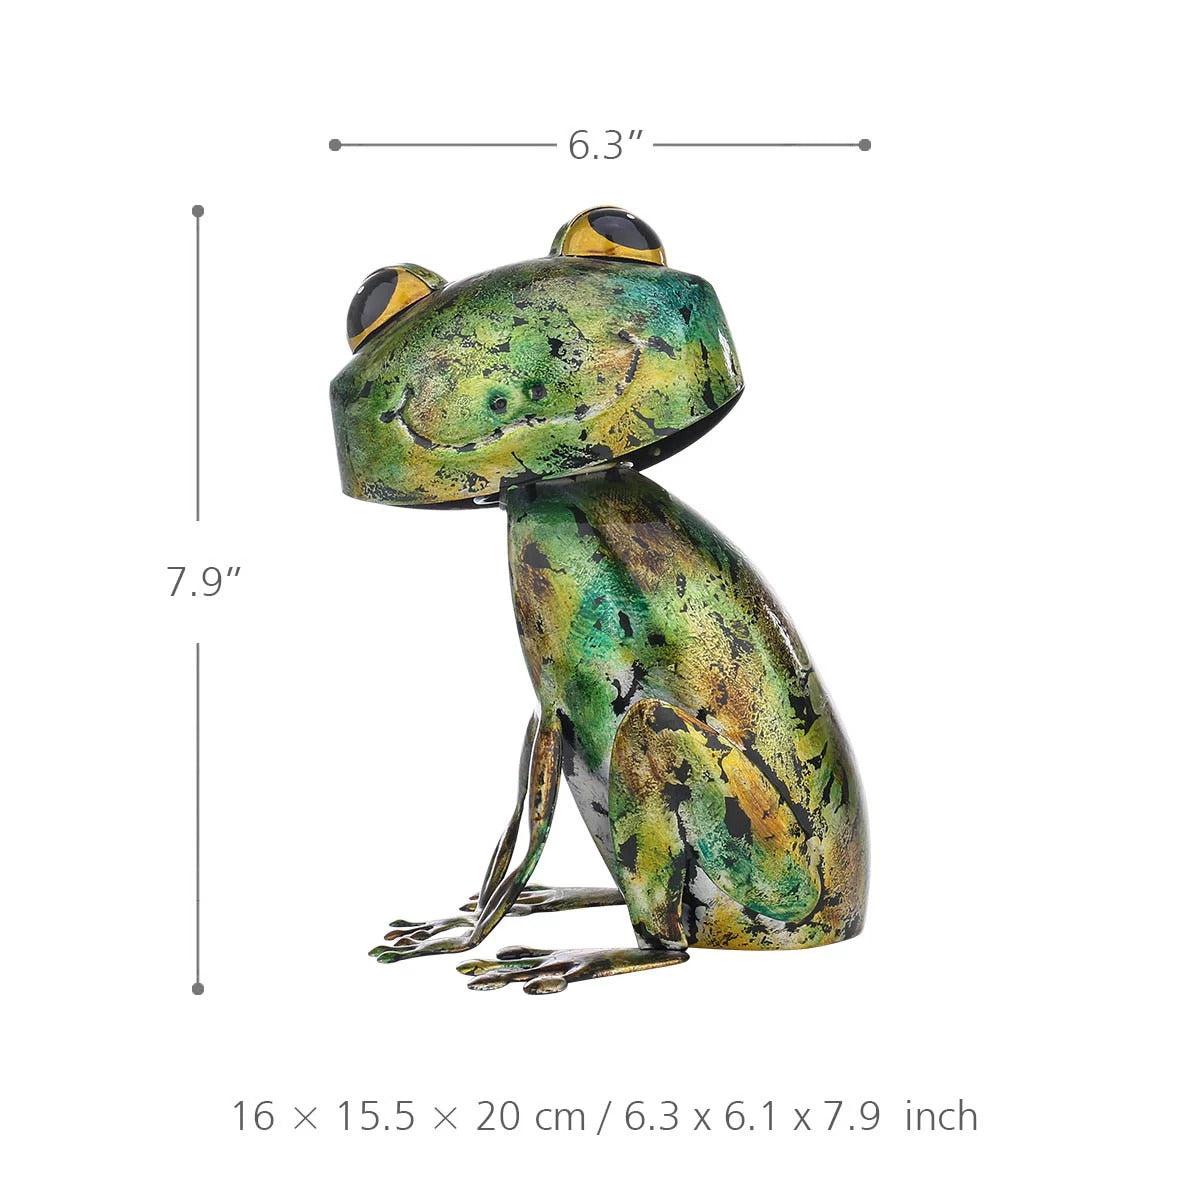 Bullfrog and Green Metal Frog Statue and Sculpture to Decorative Ornaments and Gifts